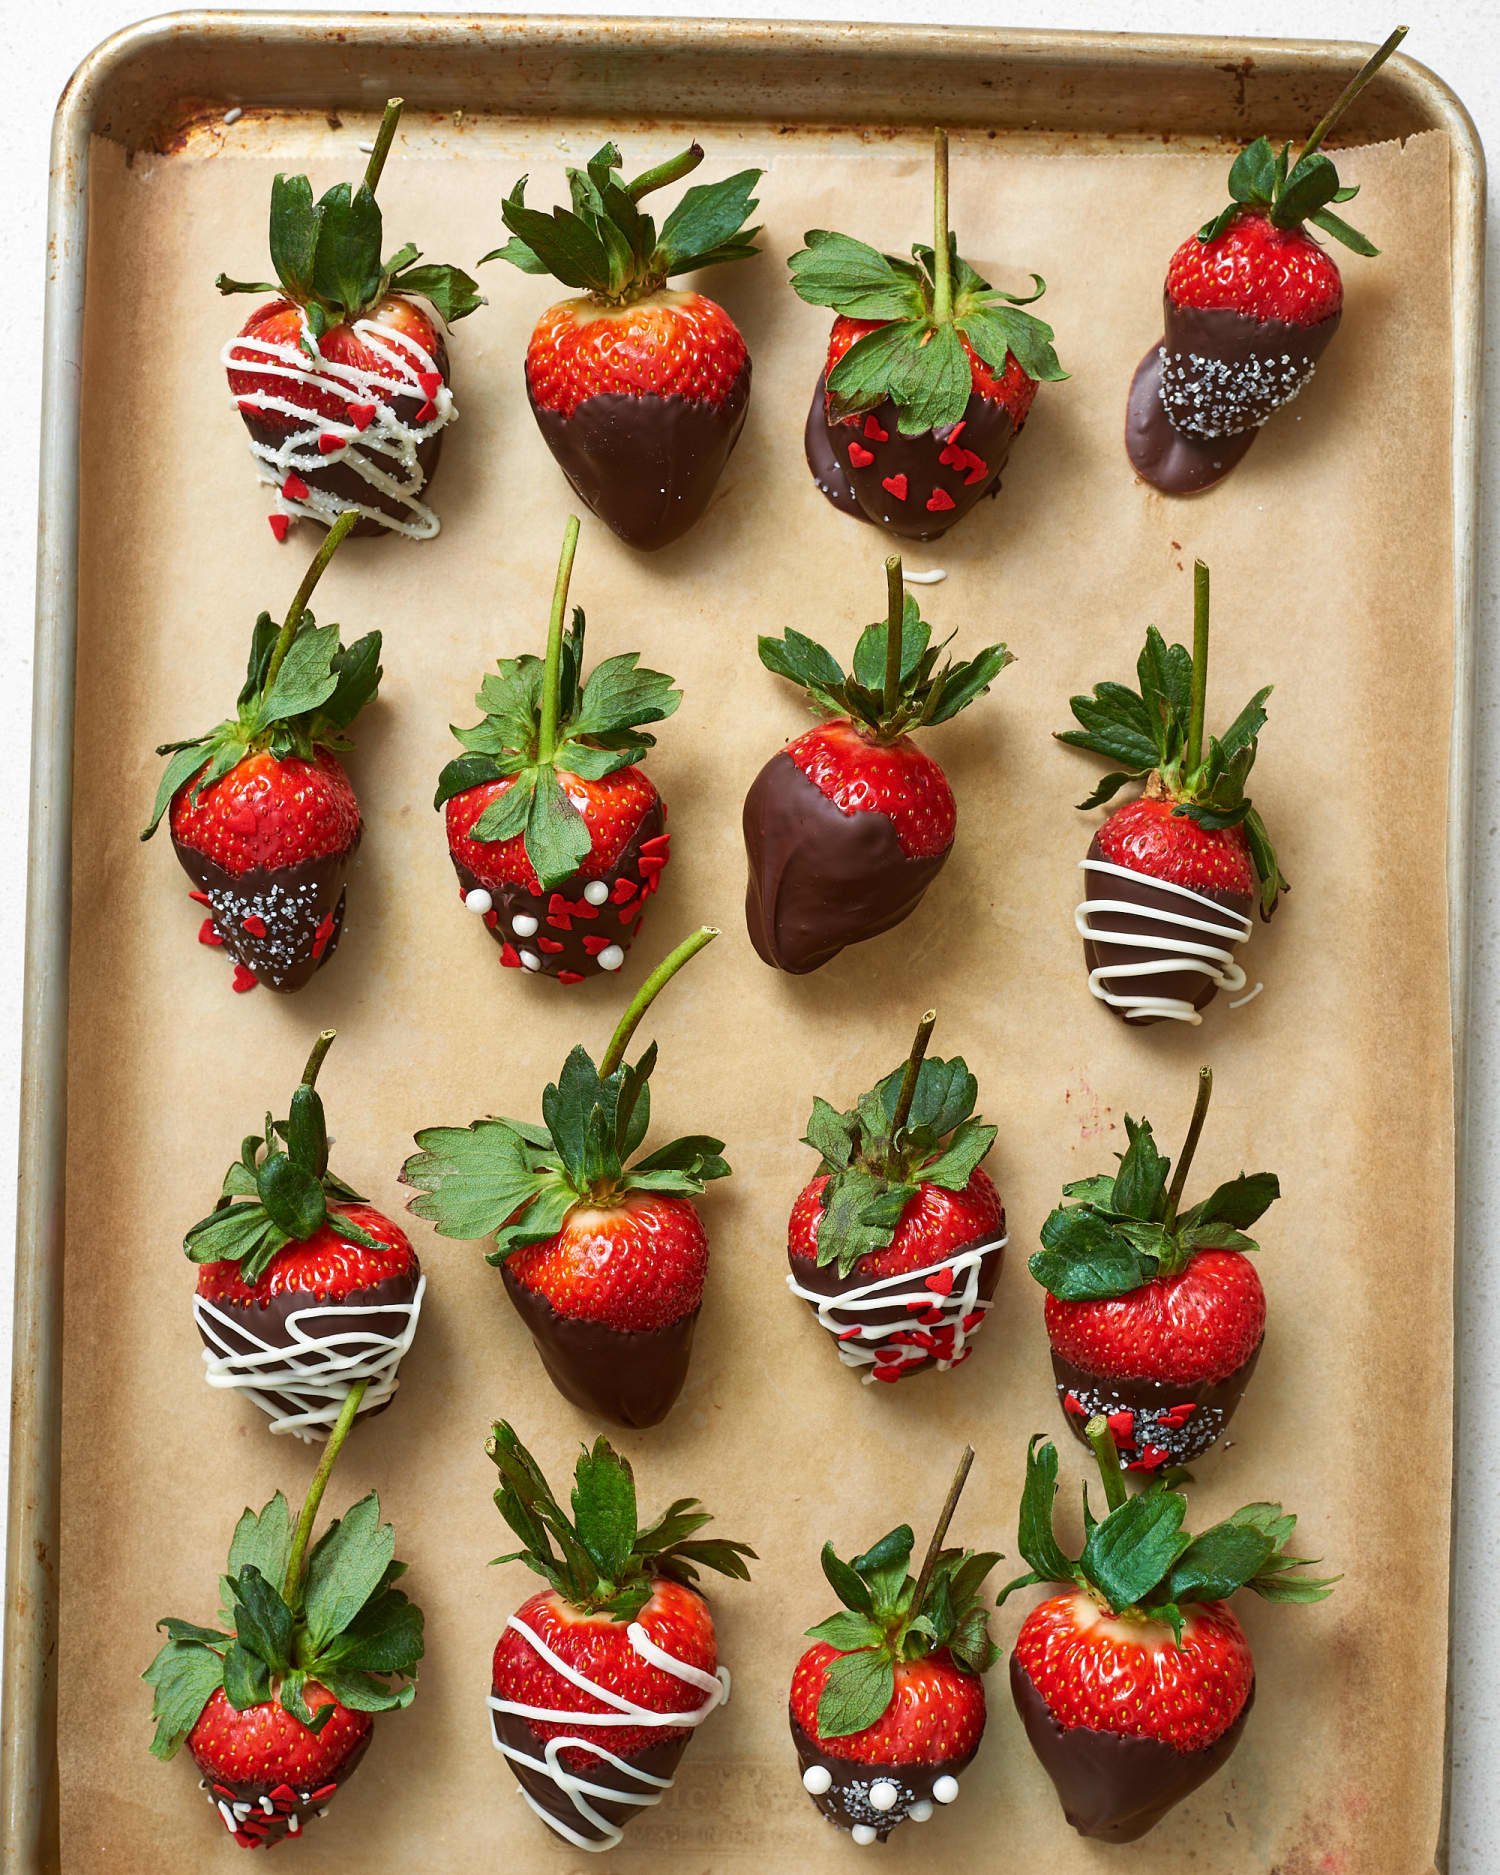 How To Make Chocolate-Covered Strawberries